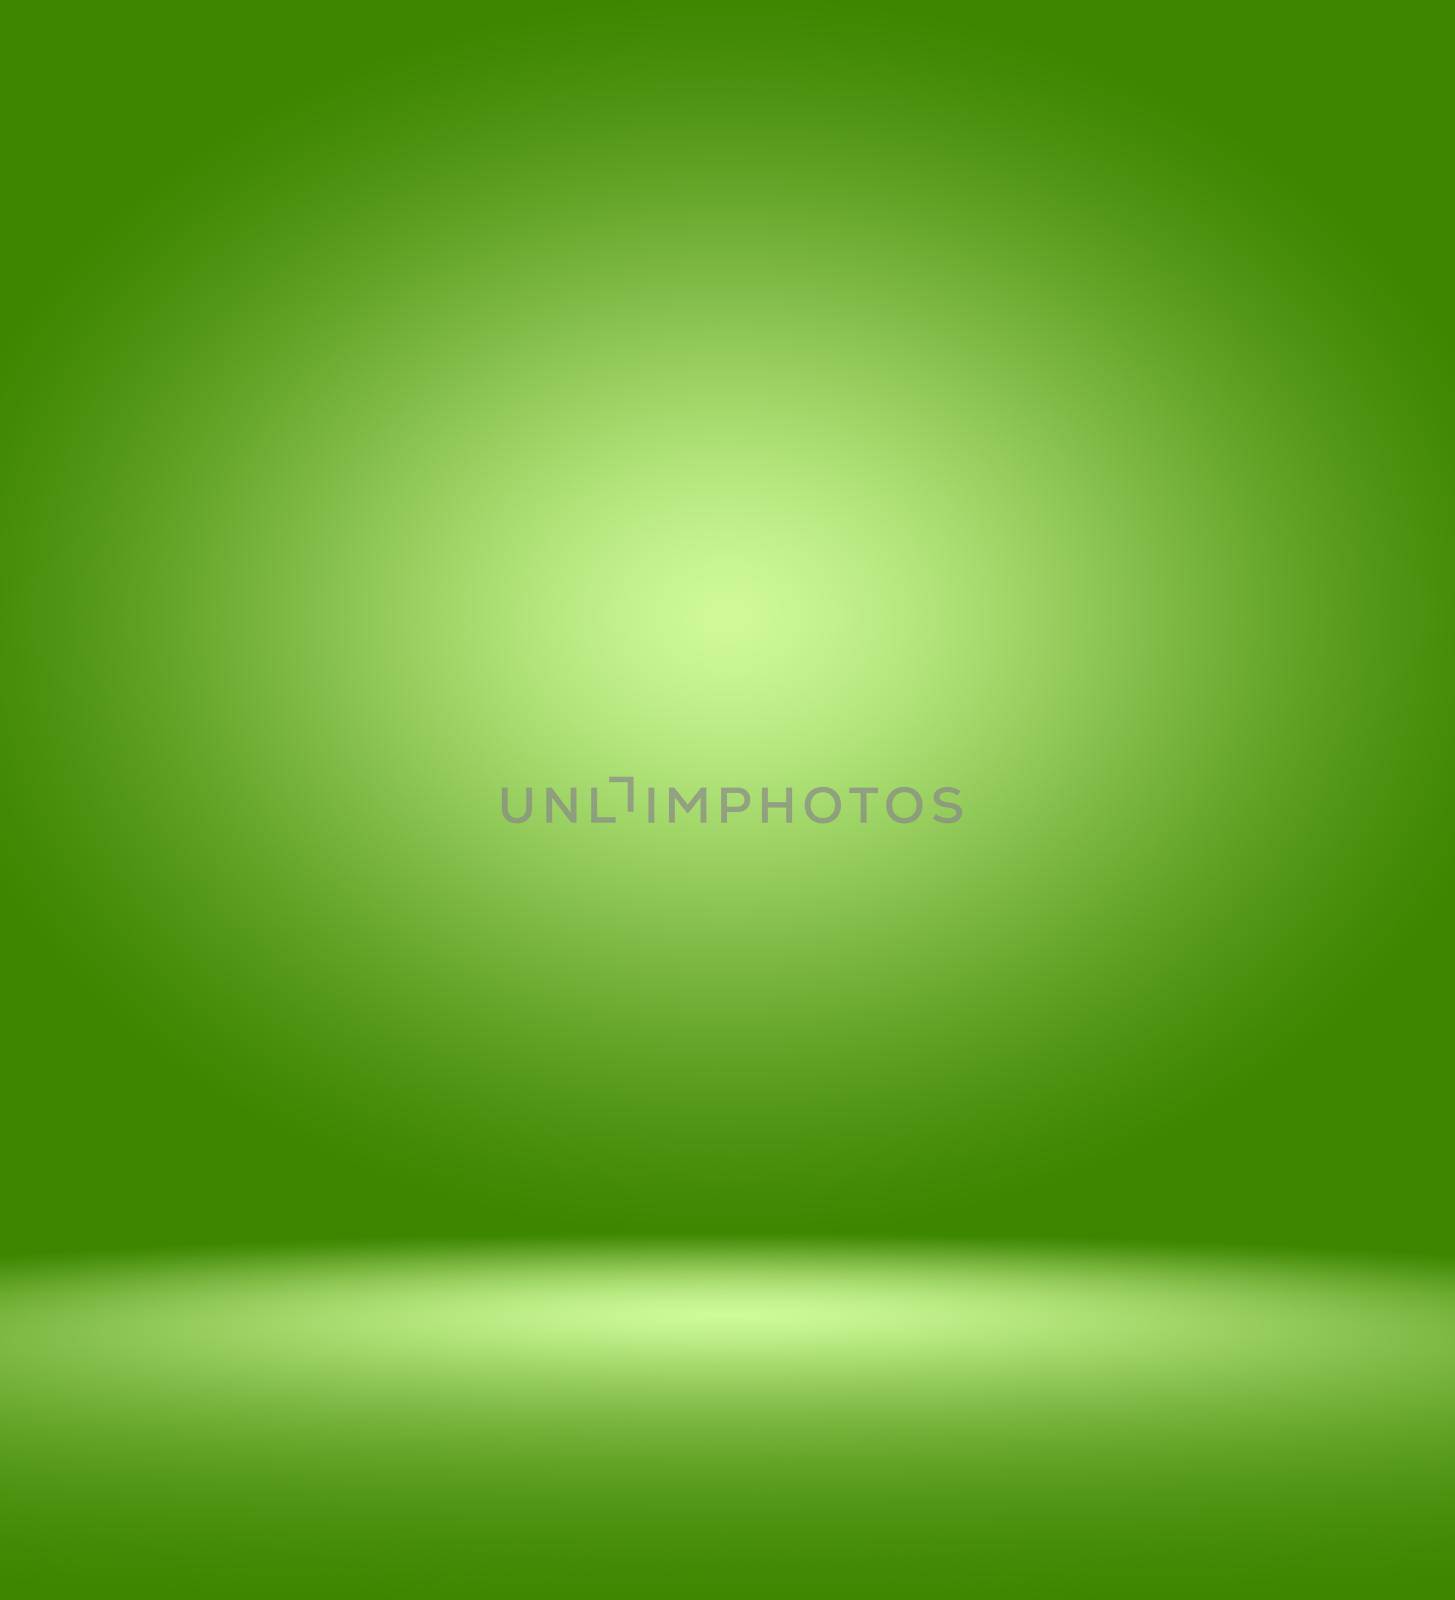 green and light green blur gradient background.